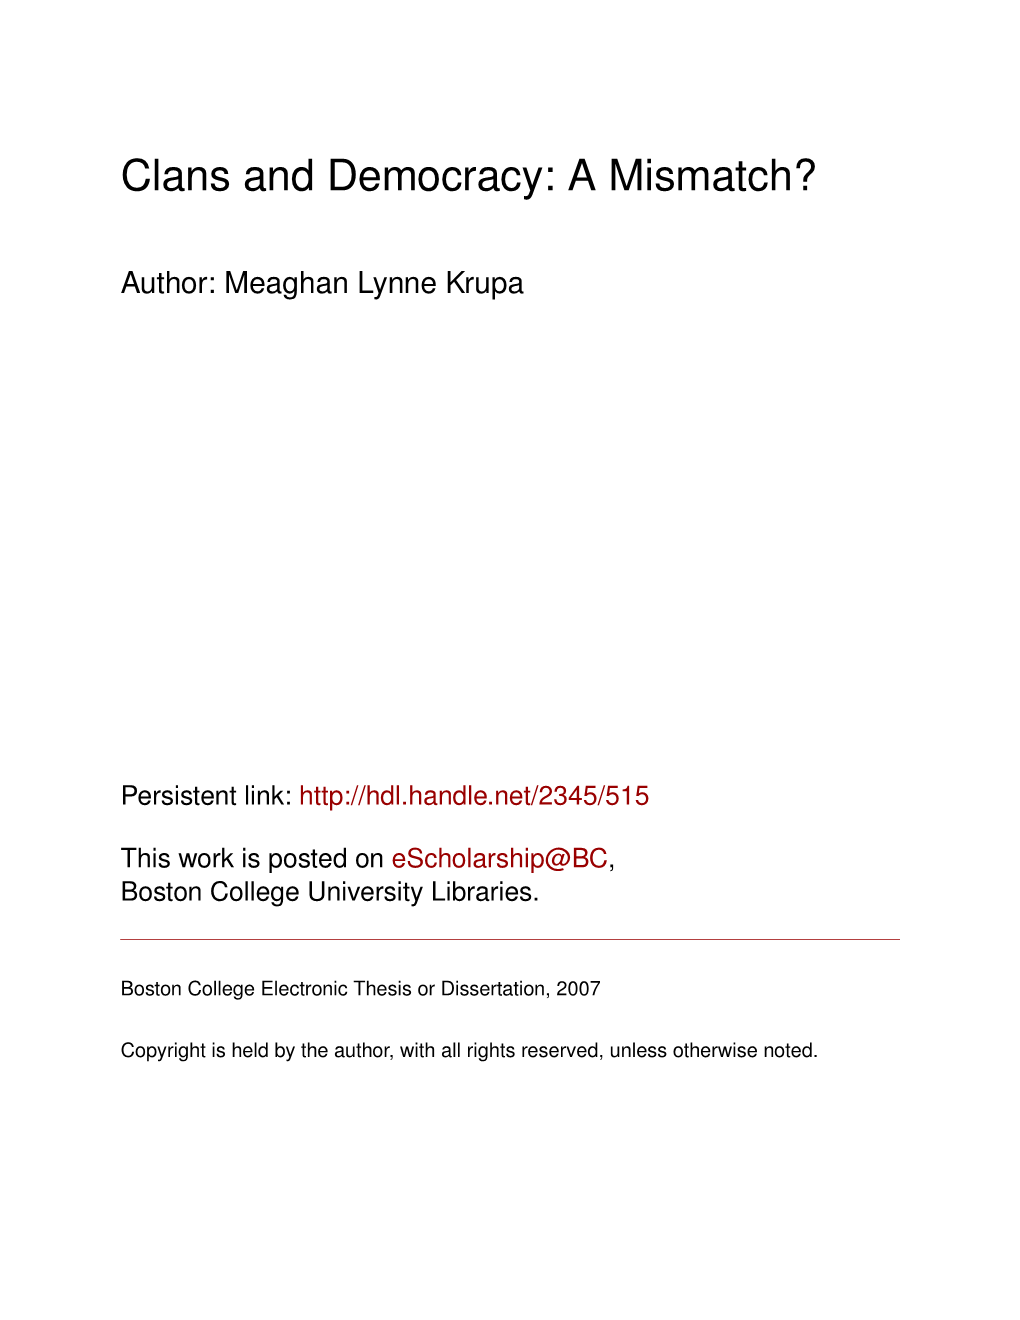 Clans and Democracy: a Mismatch?